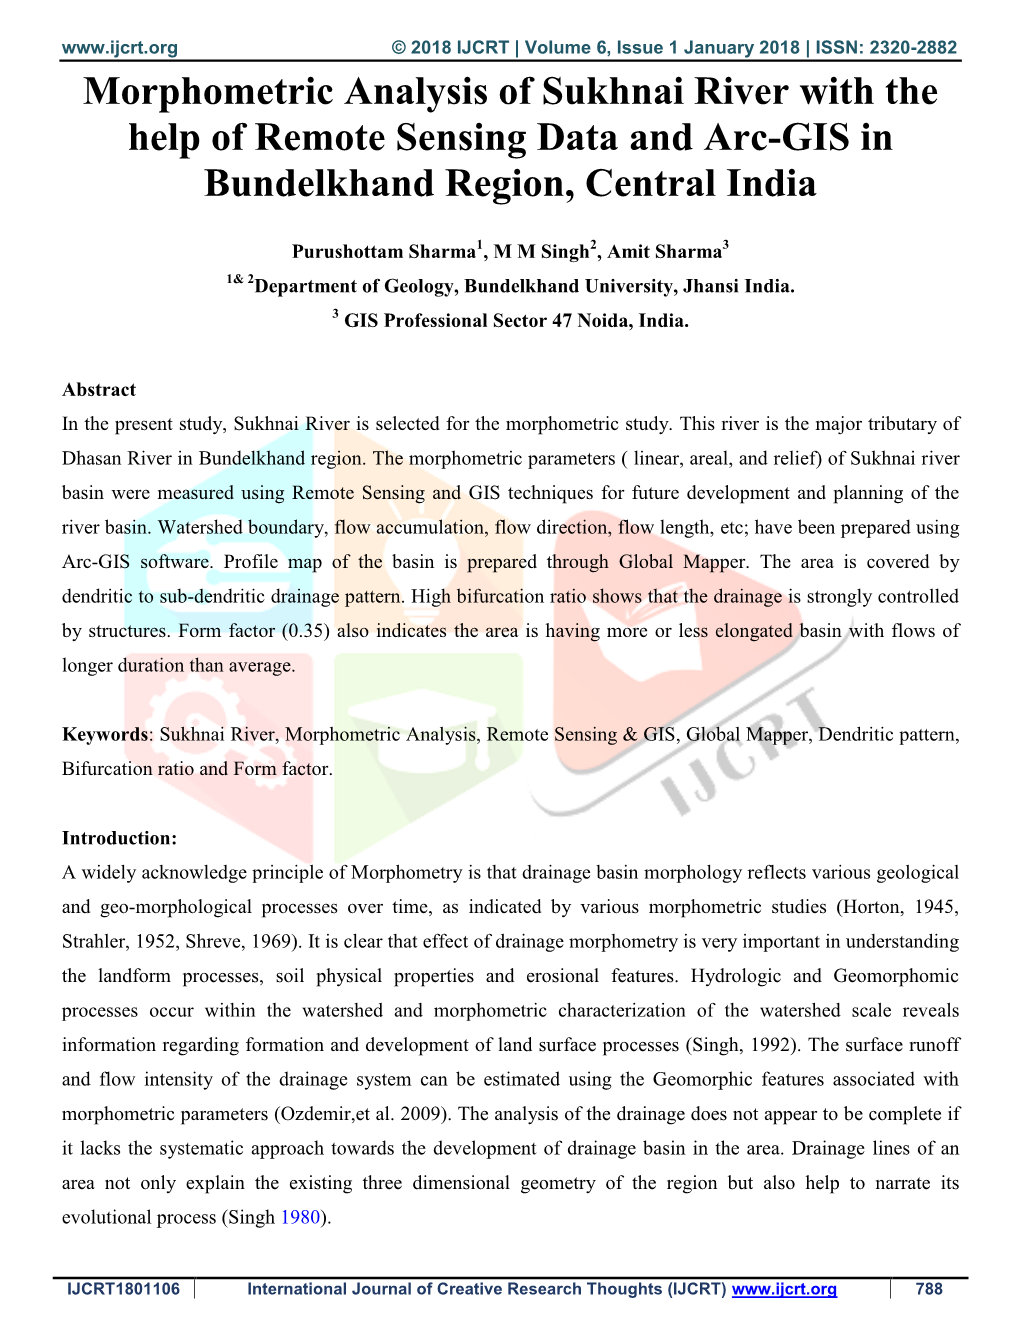 Morphometric Analysis of Sukhnai River with the Help of Remote Sensing Data and Arc-GIS in Bundelkhand Region, Central India